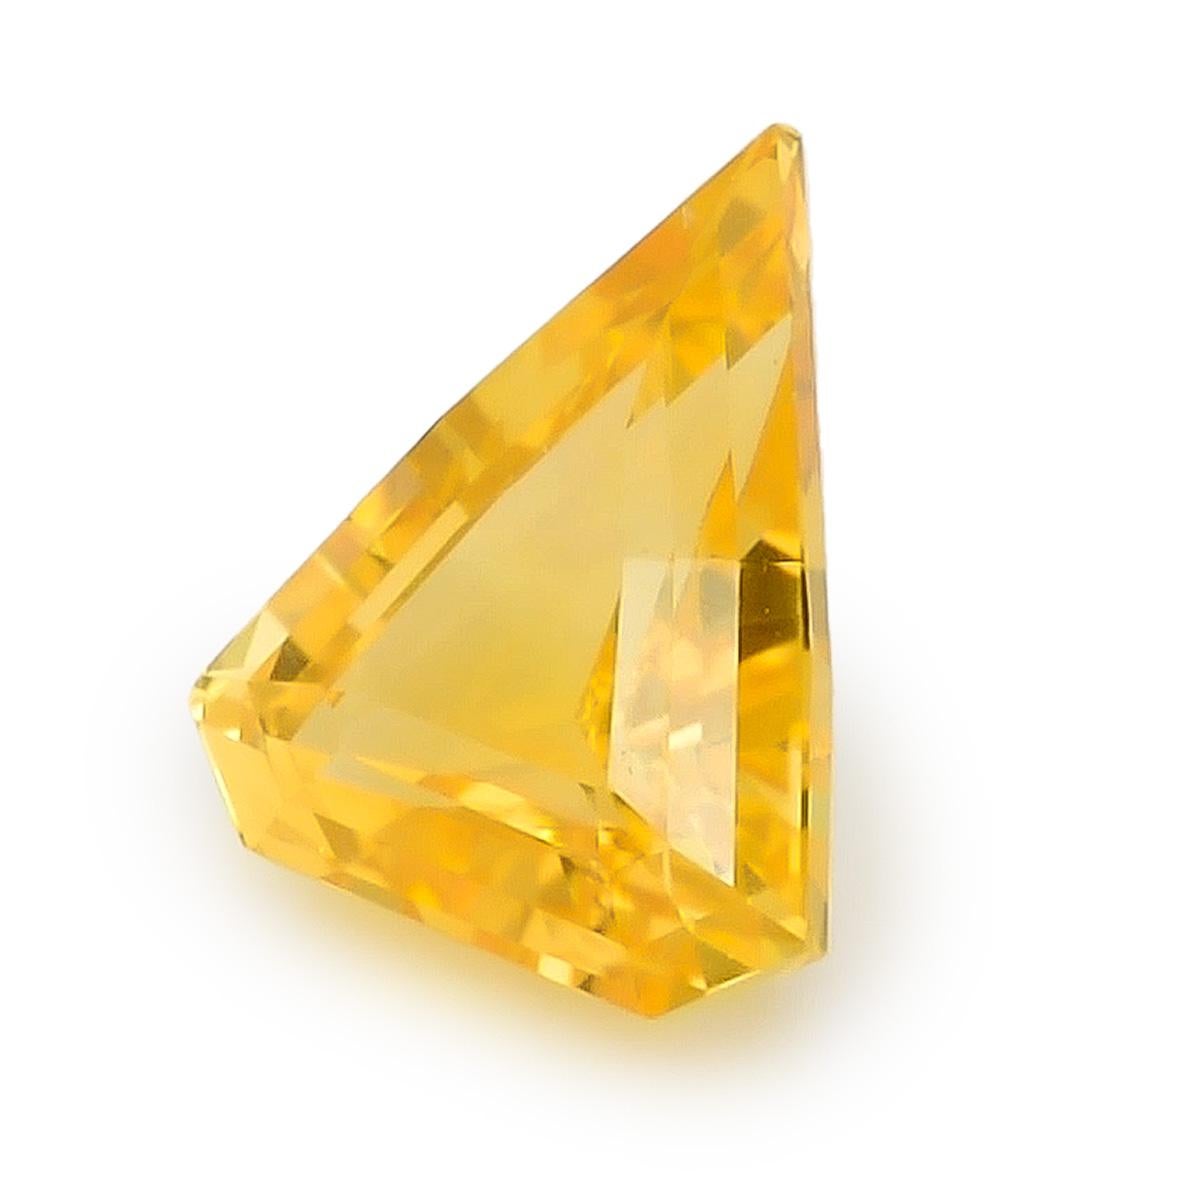 Experience the enchantment of a Natural Yellow Sapphire, a radiant gem weighing 1.44 carats. With dimensions of 7.97 x 6.41 x 3.93 mm, its alluring triangular shape captures the imagination. Hailing from the gem-rich lands of Sri Lanka, this